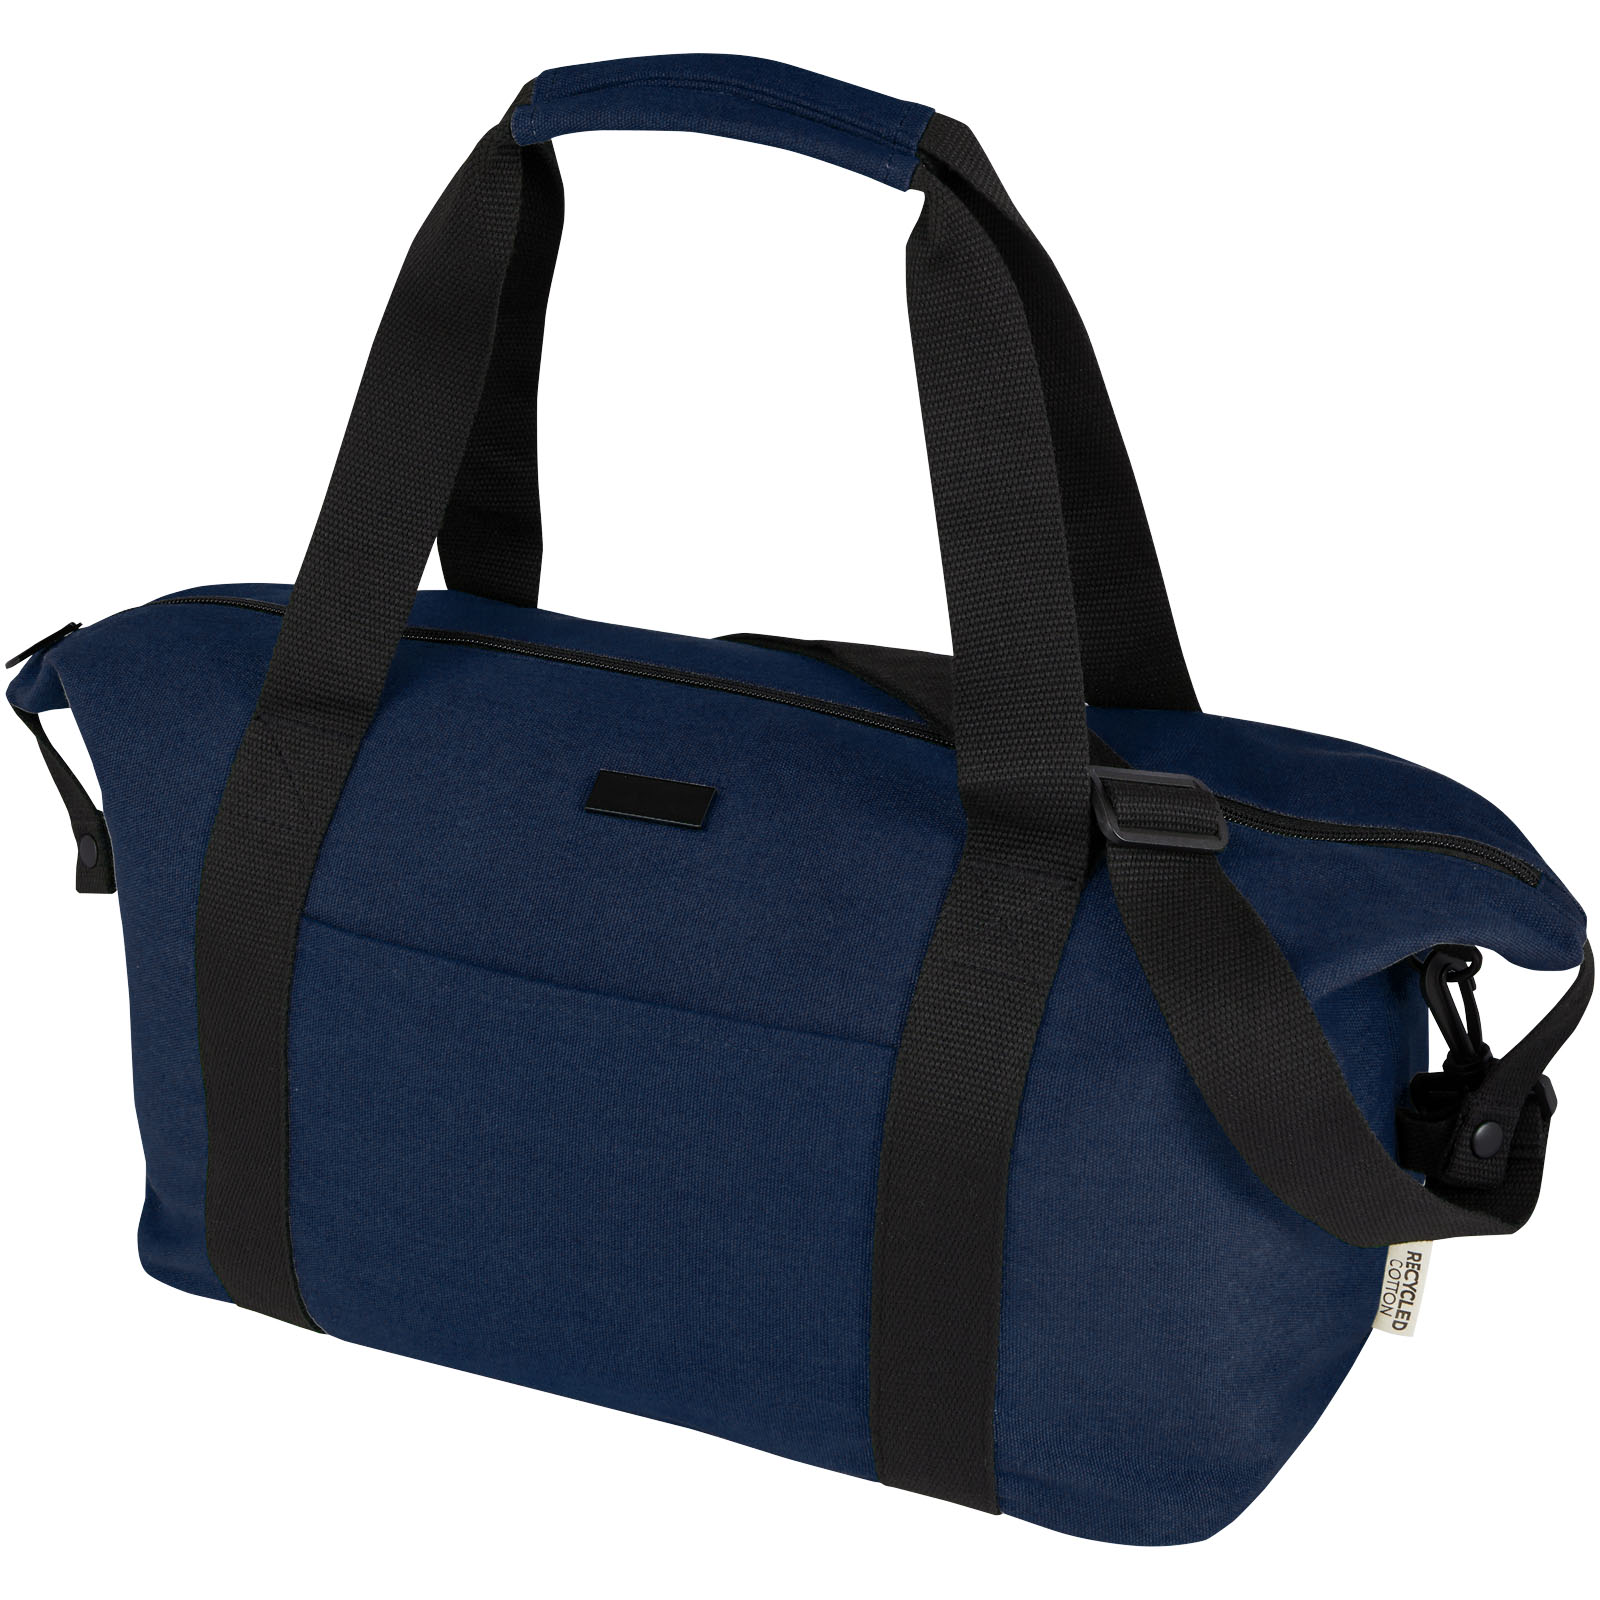 Bags - Joey GRS recycled canvas sports duffel bag 25L